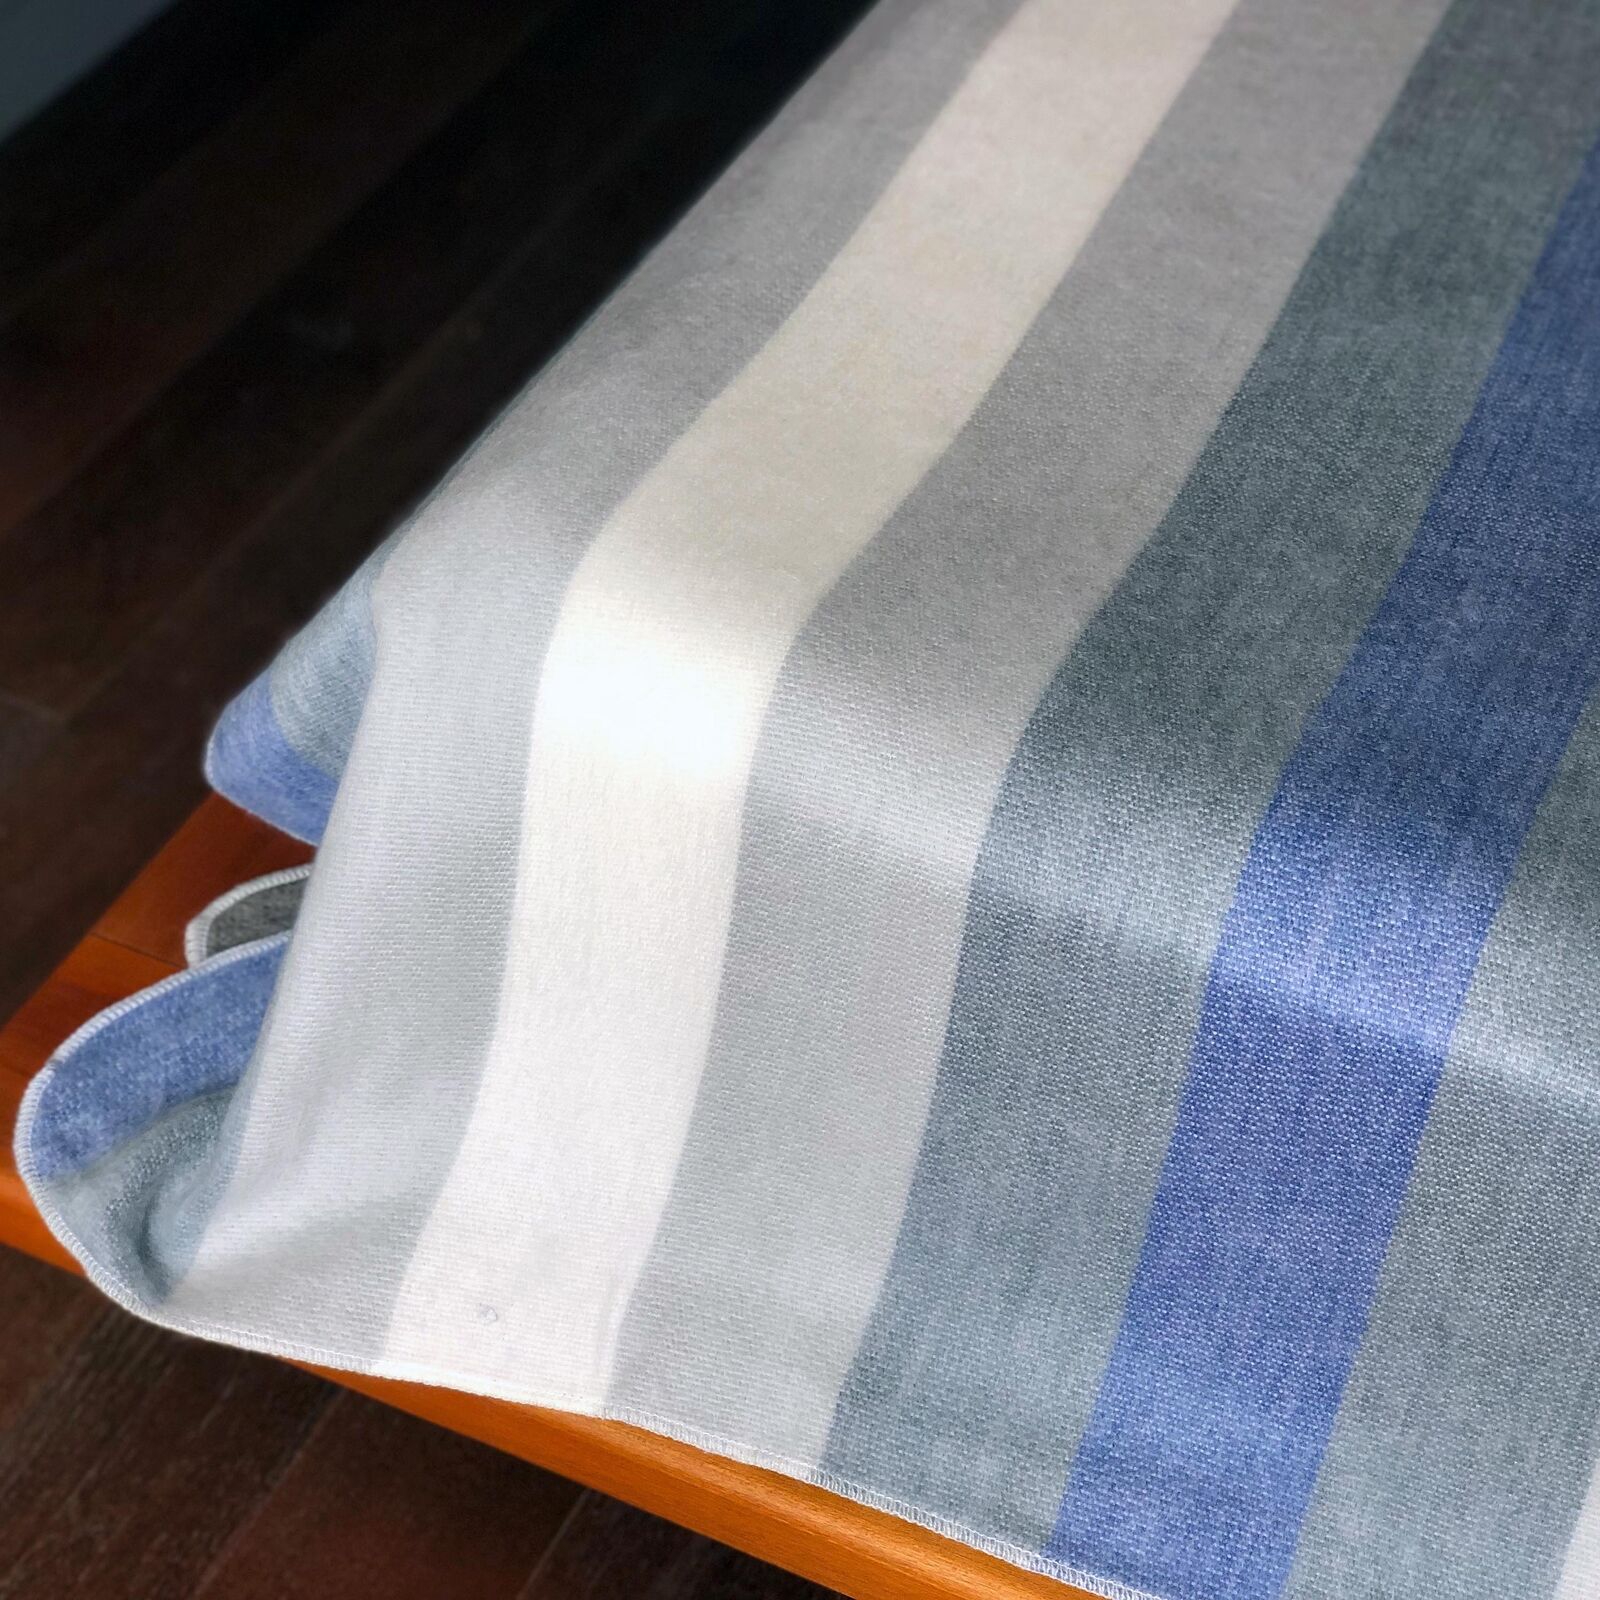 Poguios - Baby Alpaca Wool Throw Blanket / Sofa Cover - Queen 90" x 65" - thick stripes pattern white/blue/gray